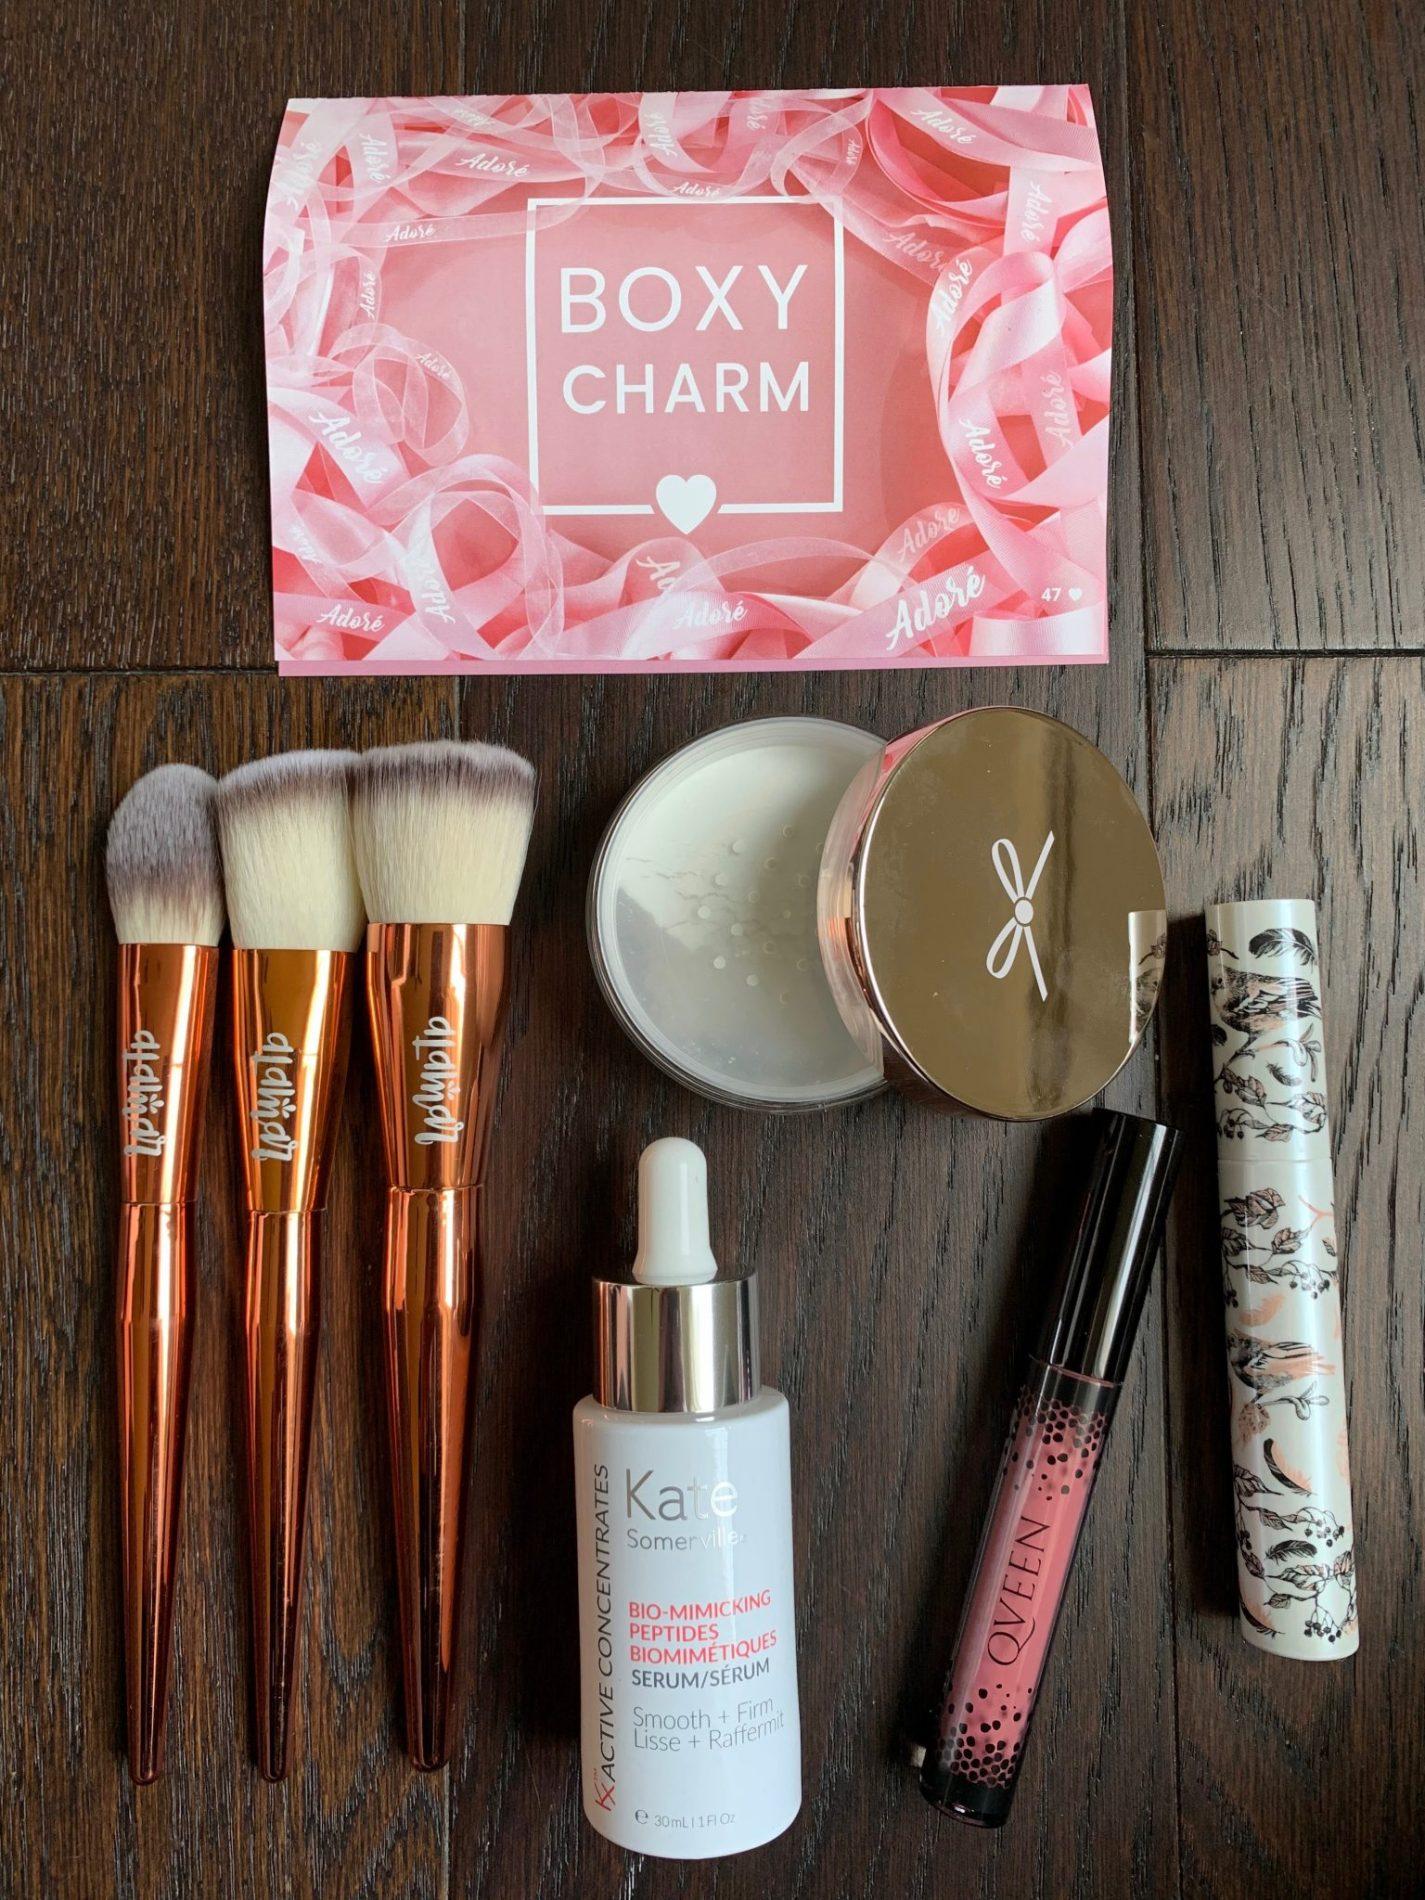 BOXYCHARM Subscription Review – February 2020 + Free Gift Coupon Code